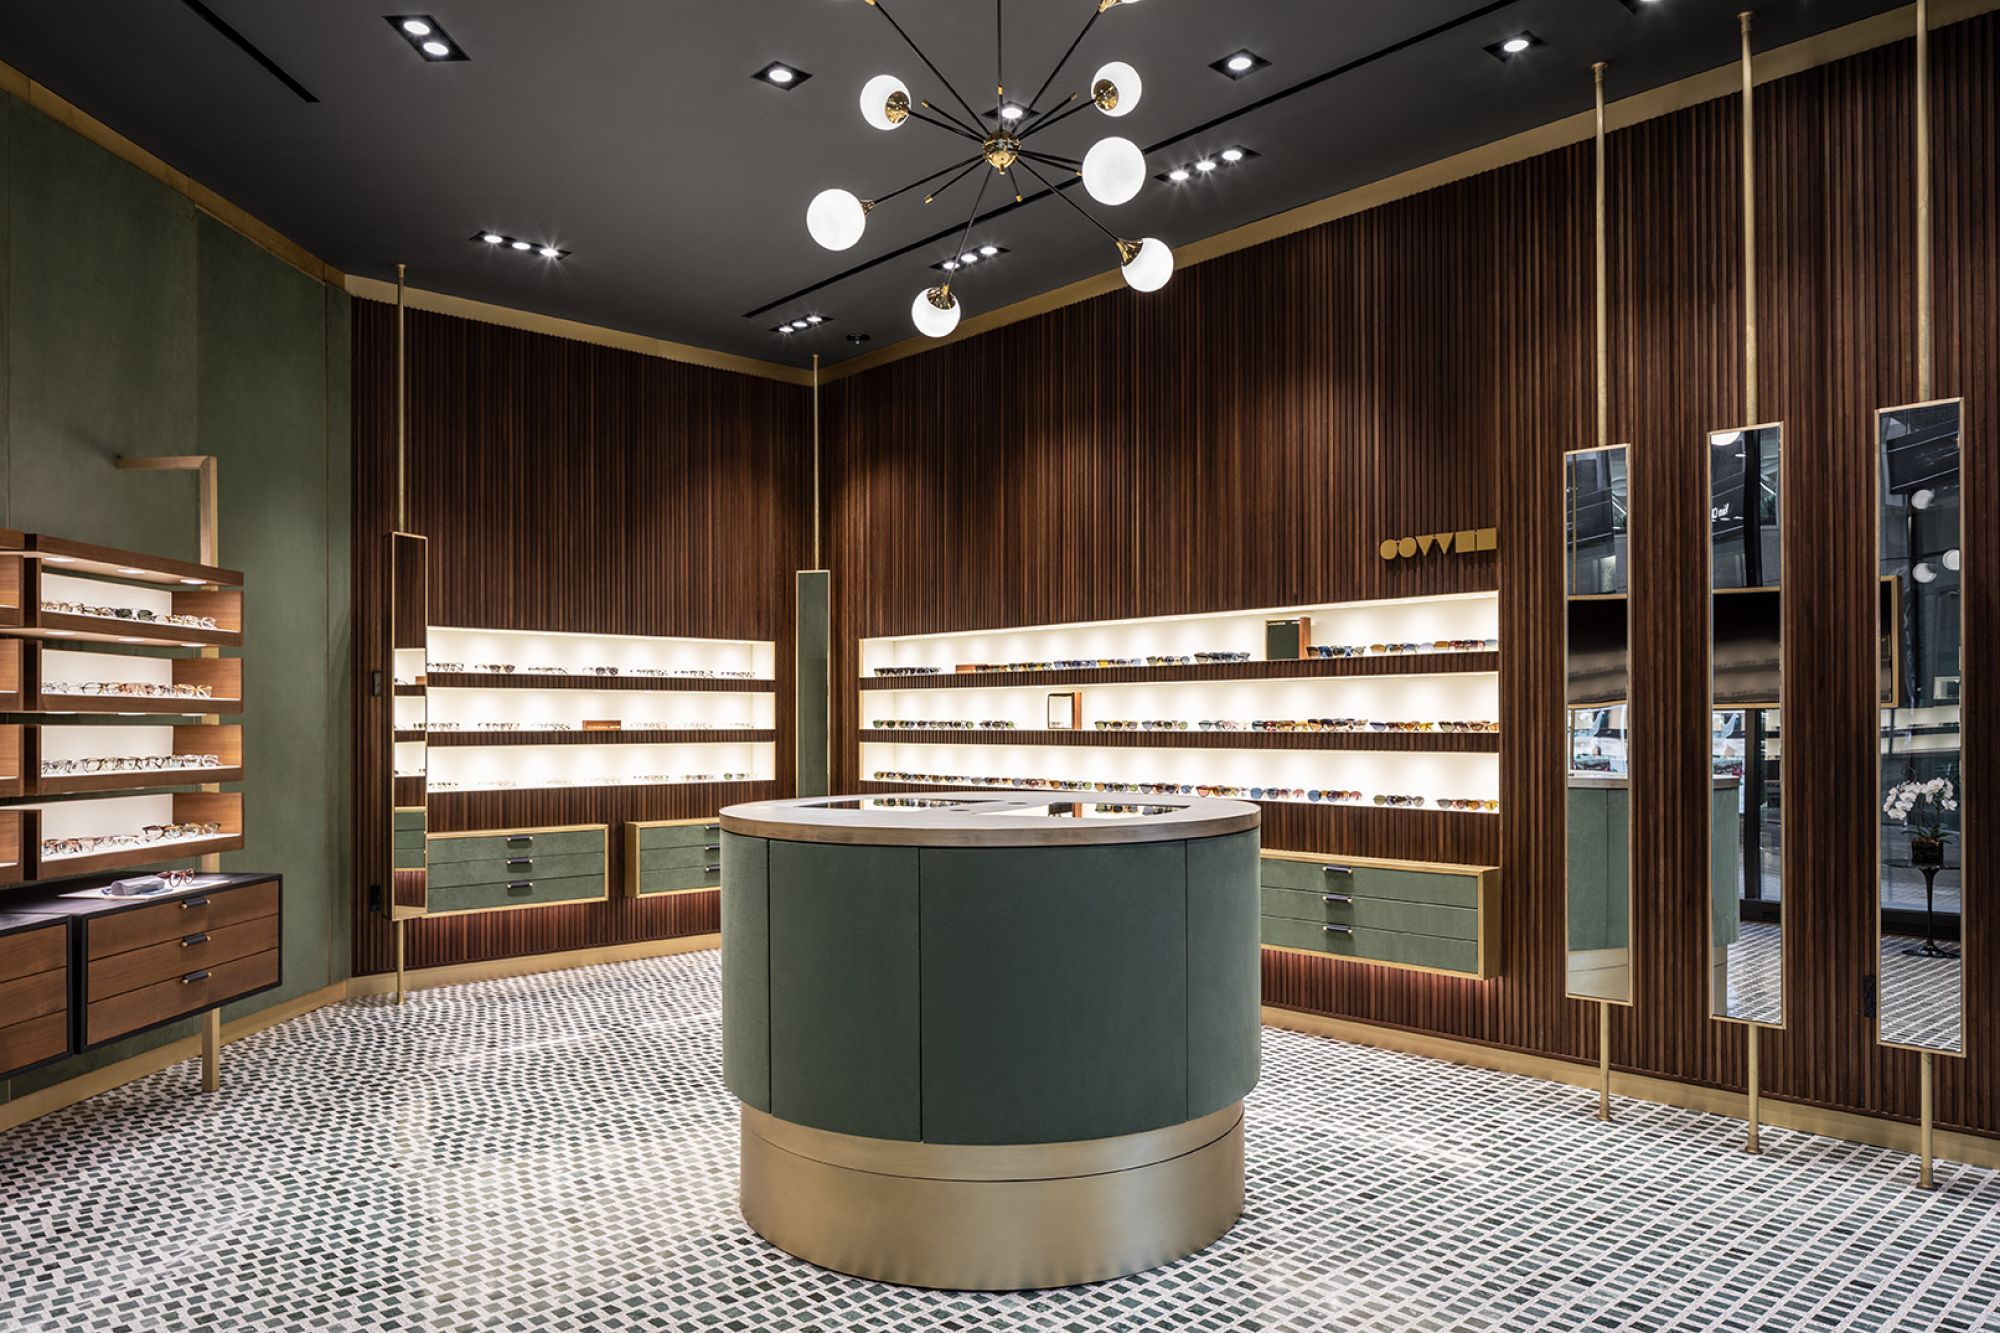 Oliver Peoples Shops at Vancouver